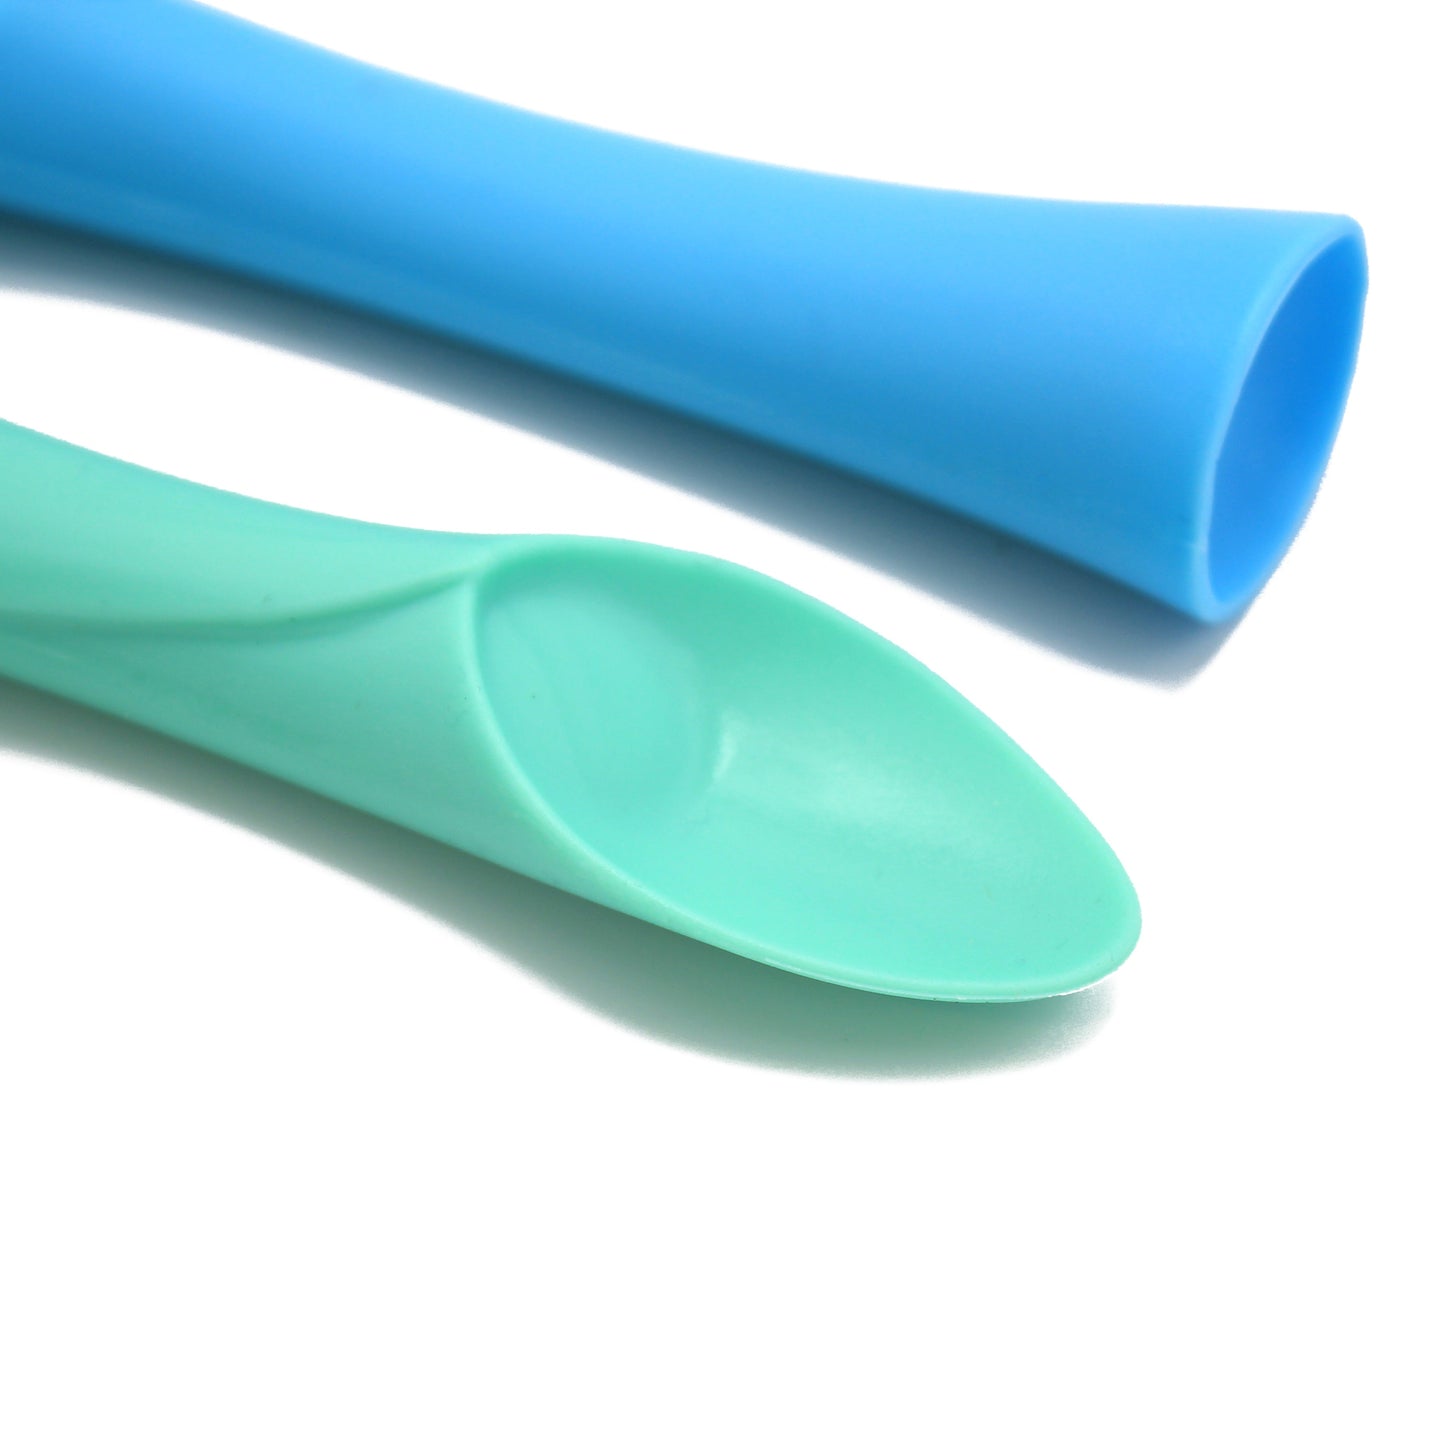 Silicone Weaning & Teething Spoons (Pack of 2)